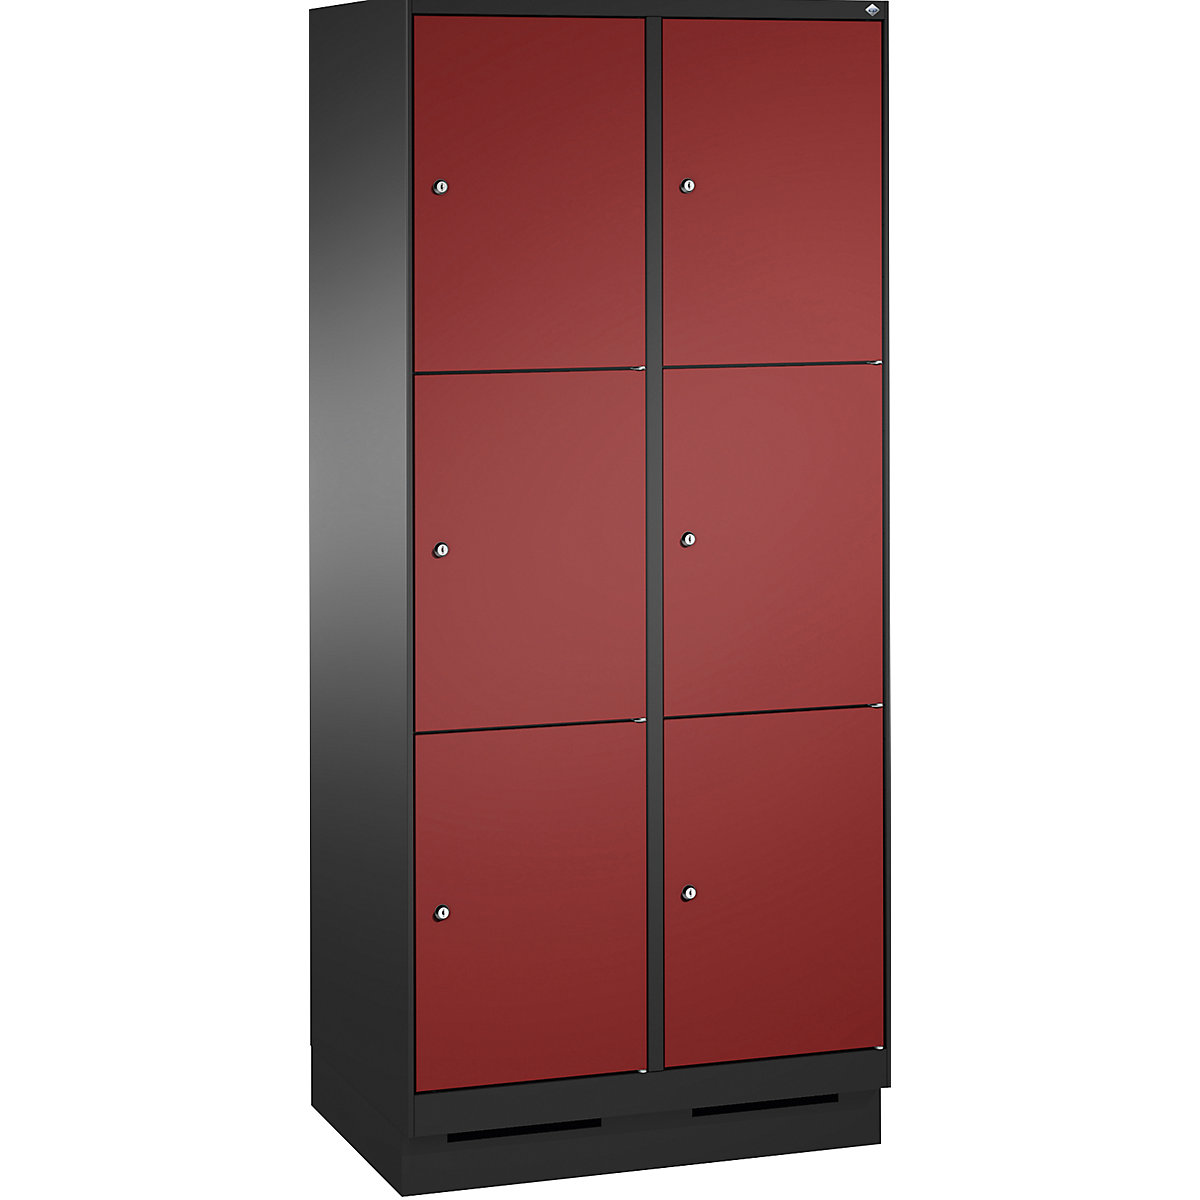 EVOLO locker unit, with plinth – C+P, 2 compartments, 3 shelf compartments each, compartment width 400 mm, black grey / ruby red-2